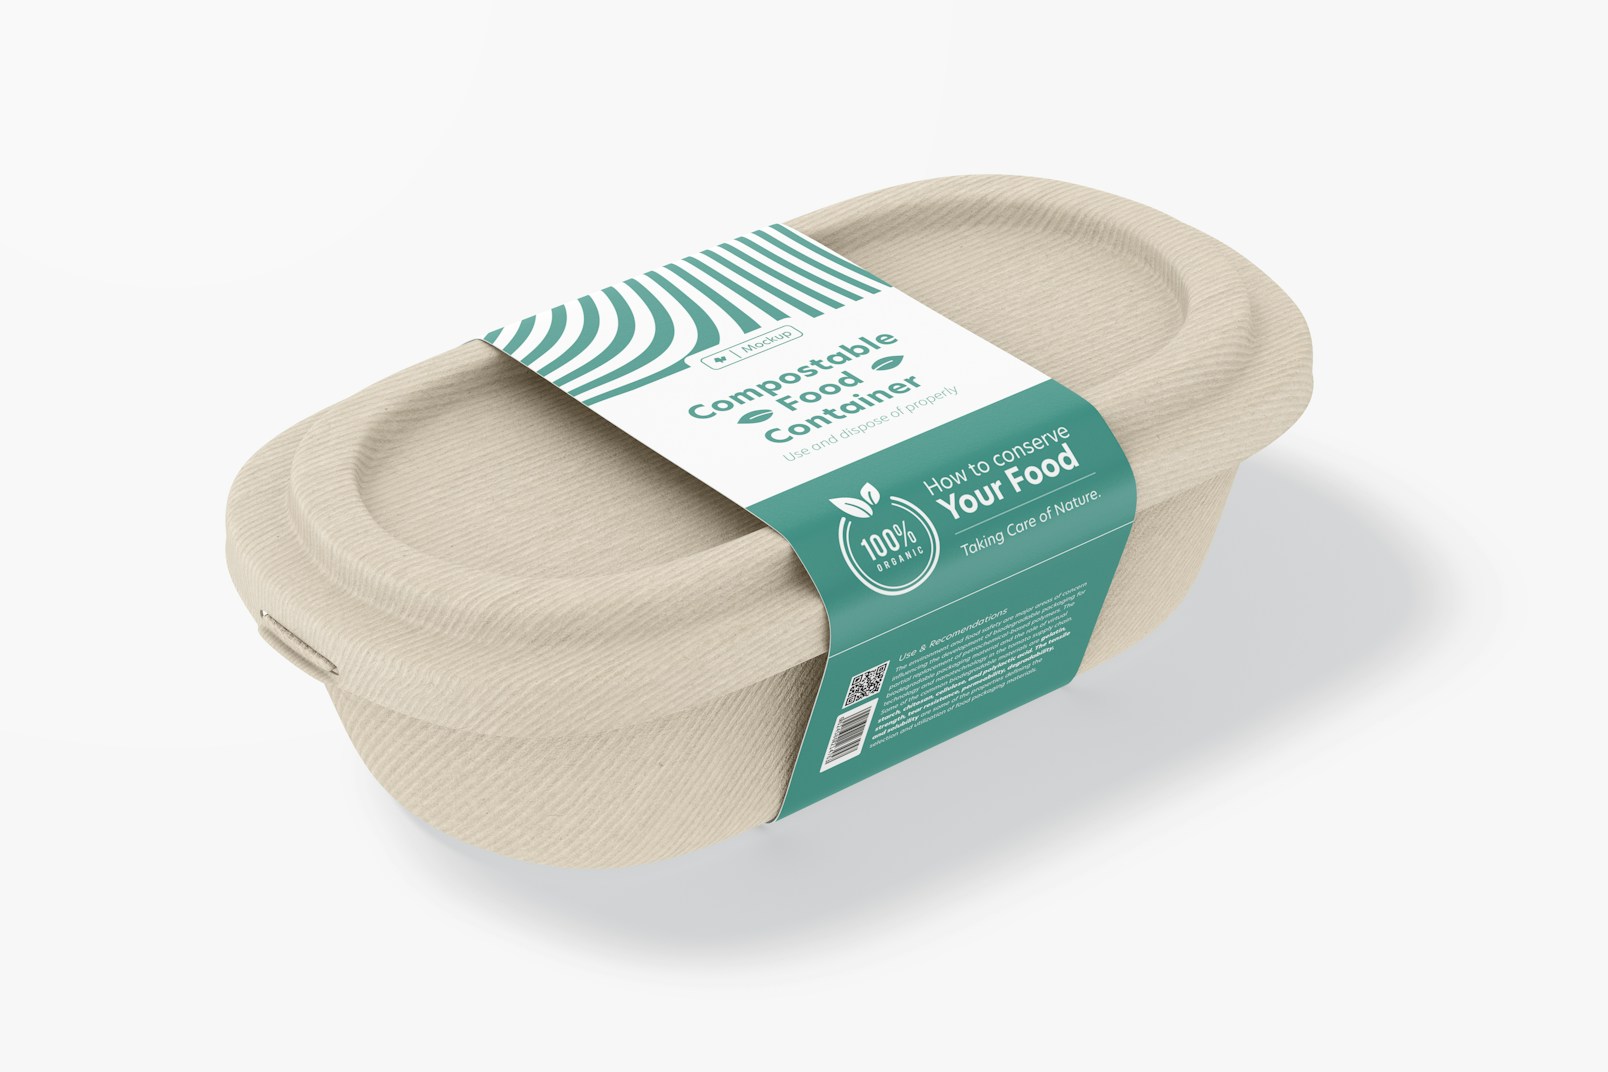 Compostable Food Container Mockup, Right View